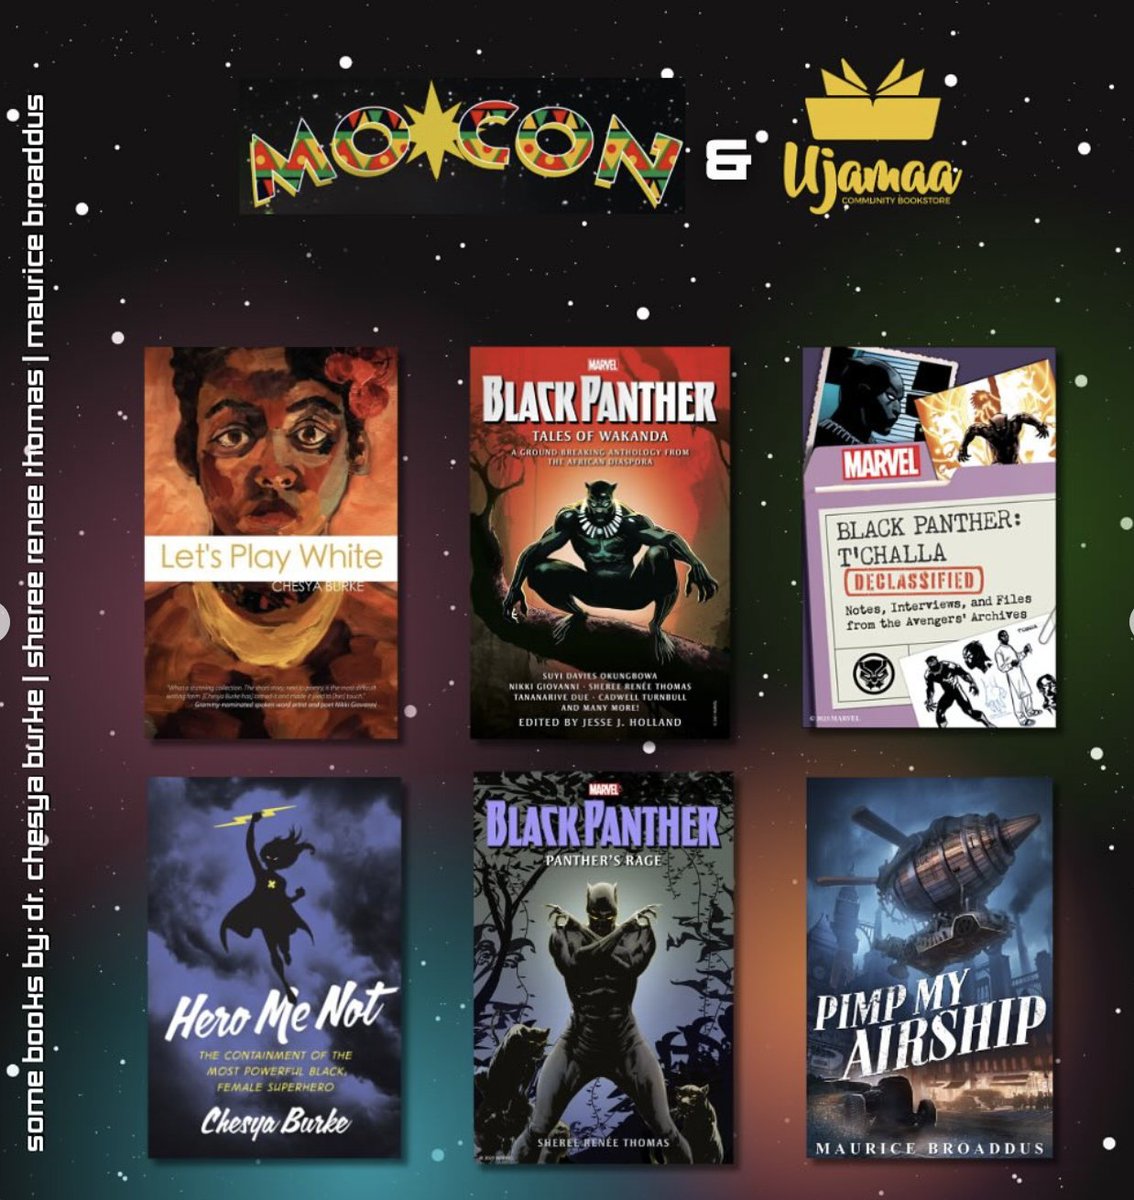 Starting at 6pm tonight, you can visit Ujamaa Community Bookstore to take part in Mo*Con, an intimate convention built around food, community and conversations about art and social justice. Learn more about the 3-day fest: indianahumanities.org/event/mocon-mo…